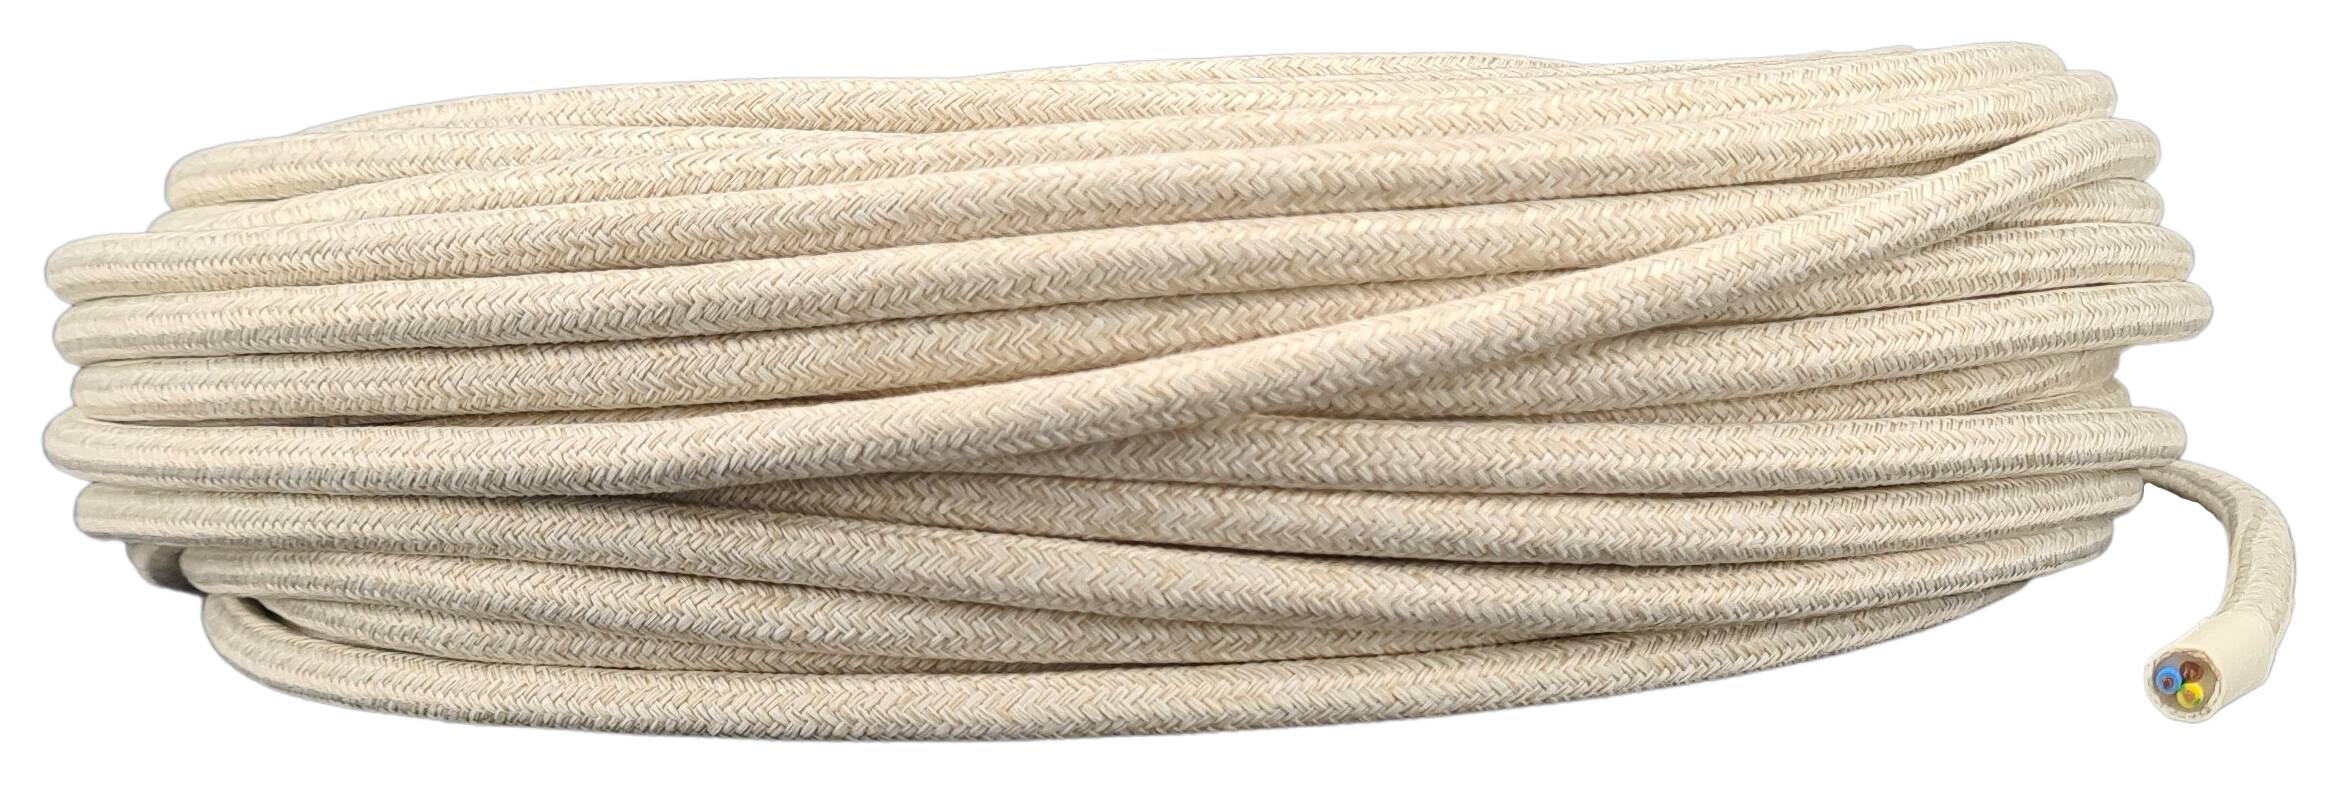 cable 3G 0,75 H03VV-F textile braided flecked beige